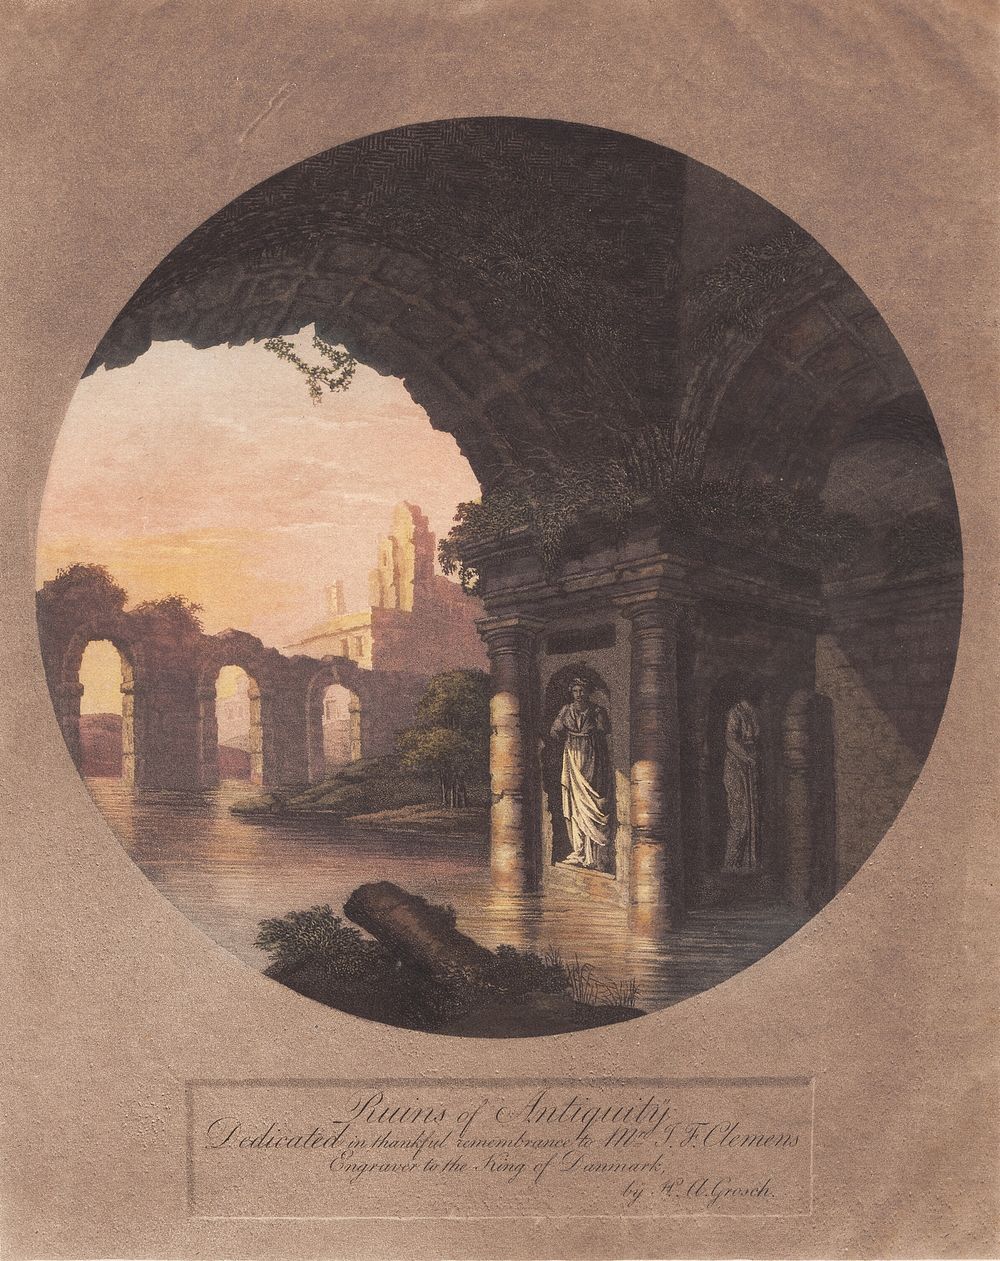 Ruins of Antiquity.Dedicated to Clemens by Heinrich Grosch